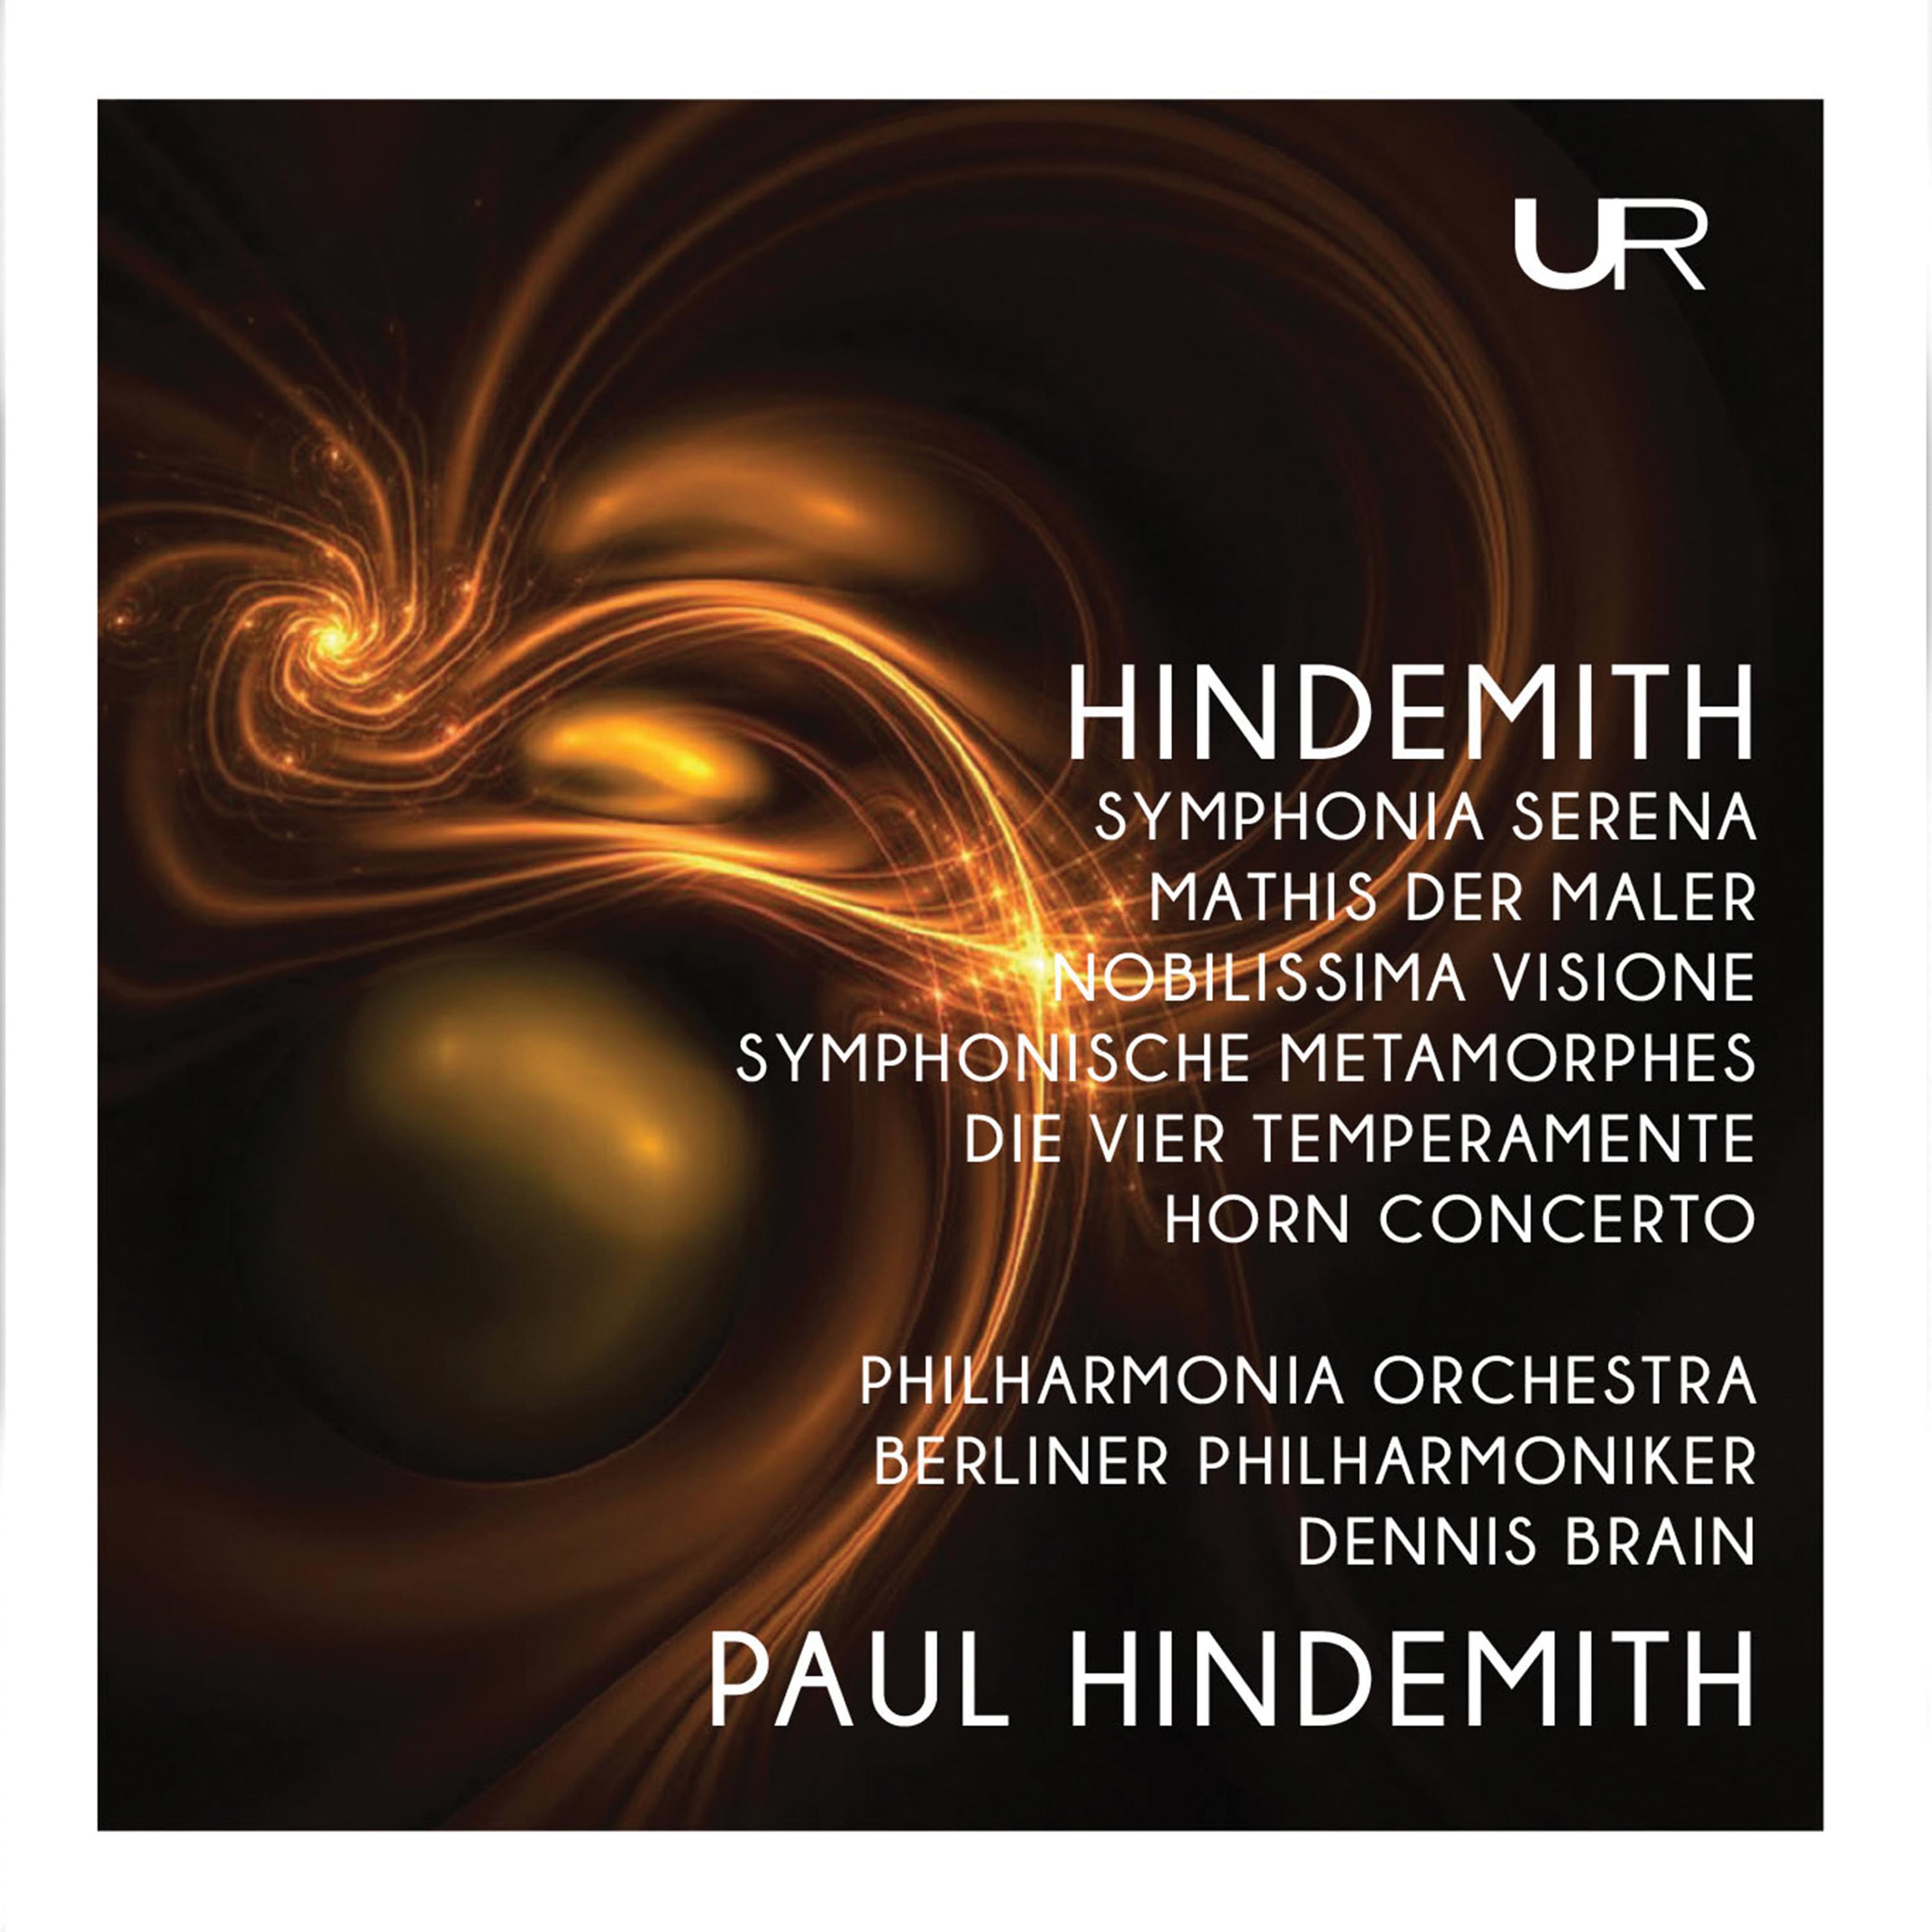 Horn Concerto:III. Very slow - Moderately fast